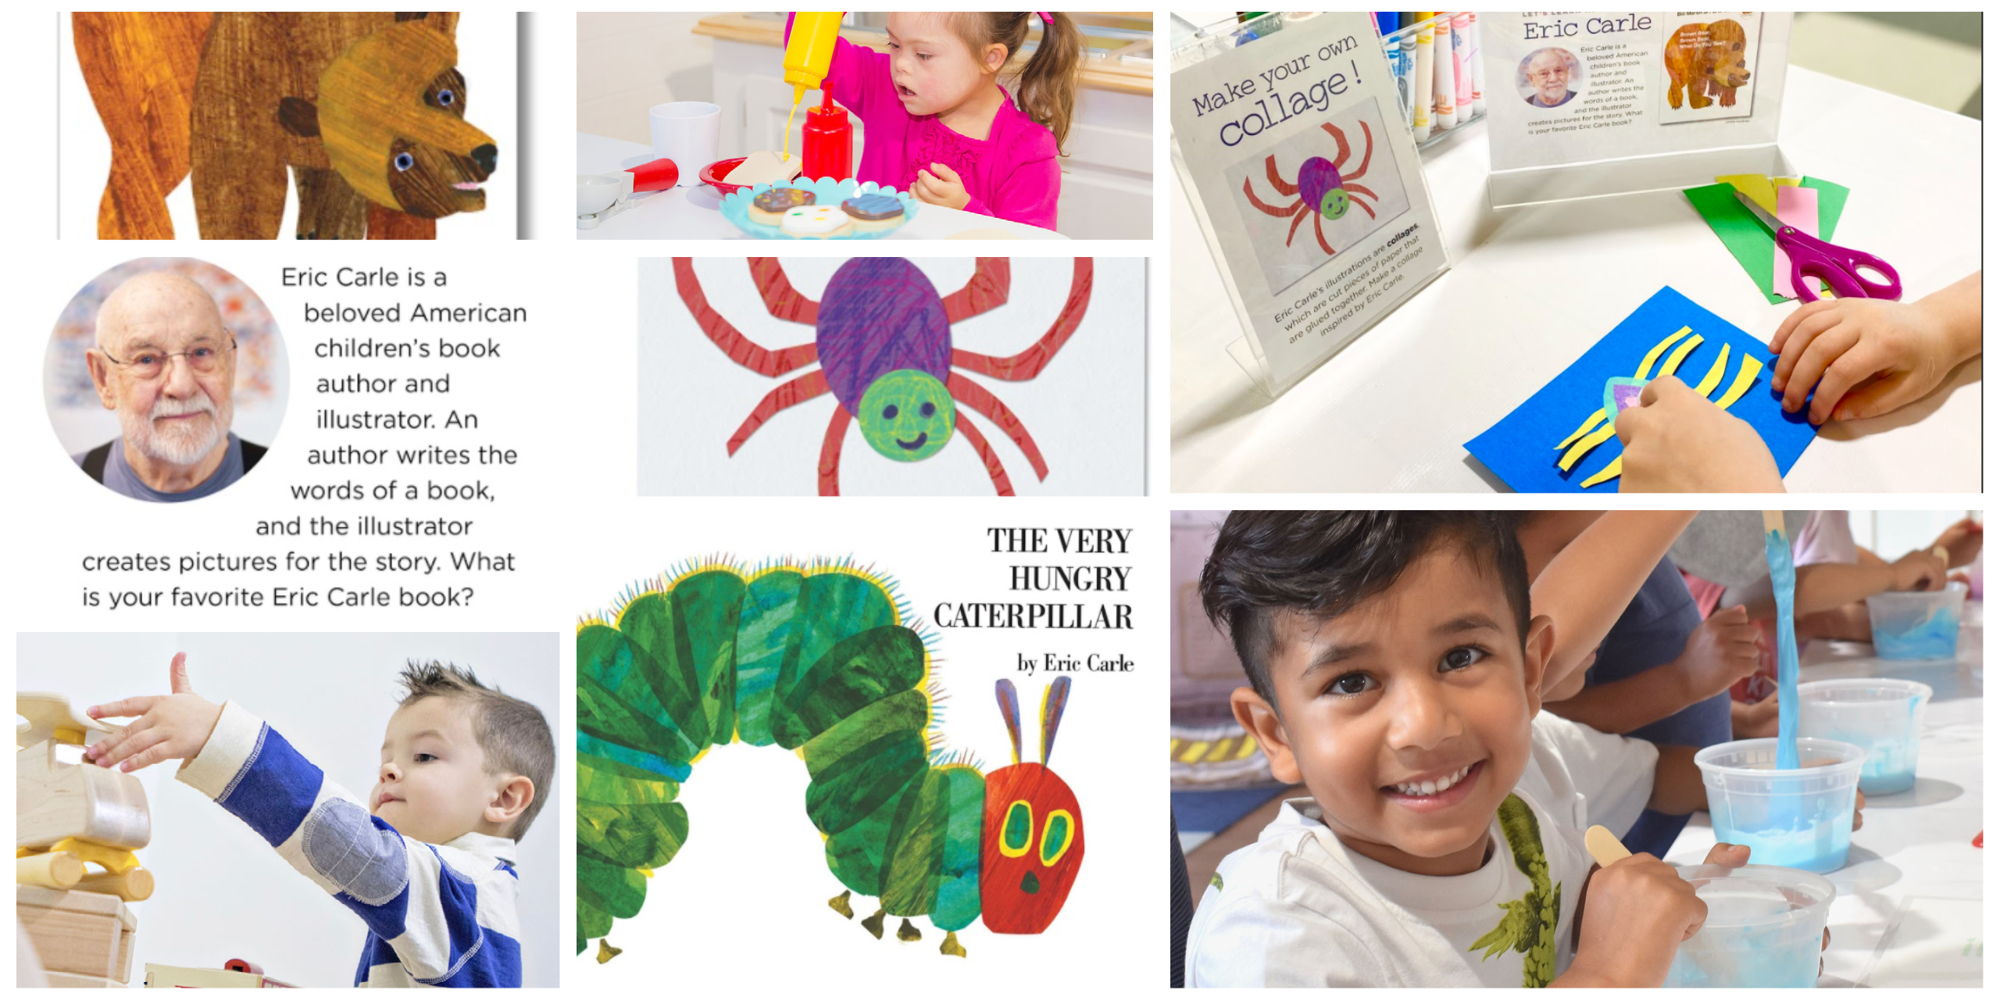 Let’s Learn About Eric Carle at Play Street Museum - Lake Highlands promotional image